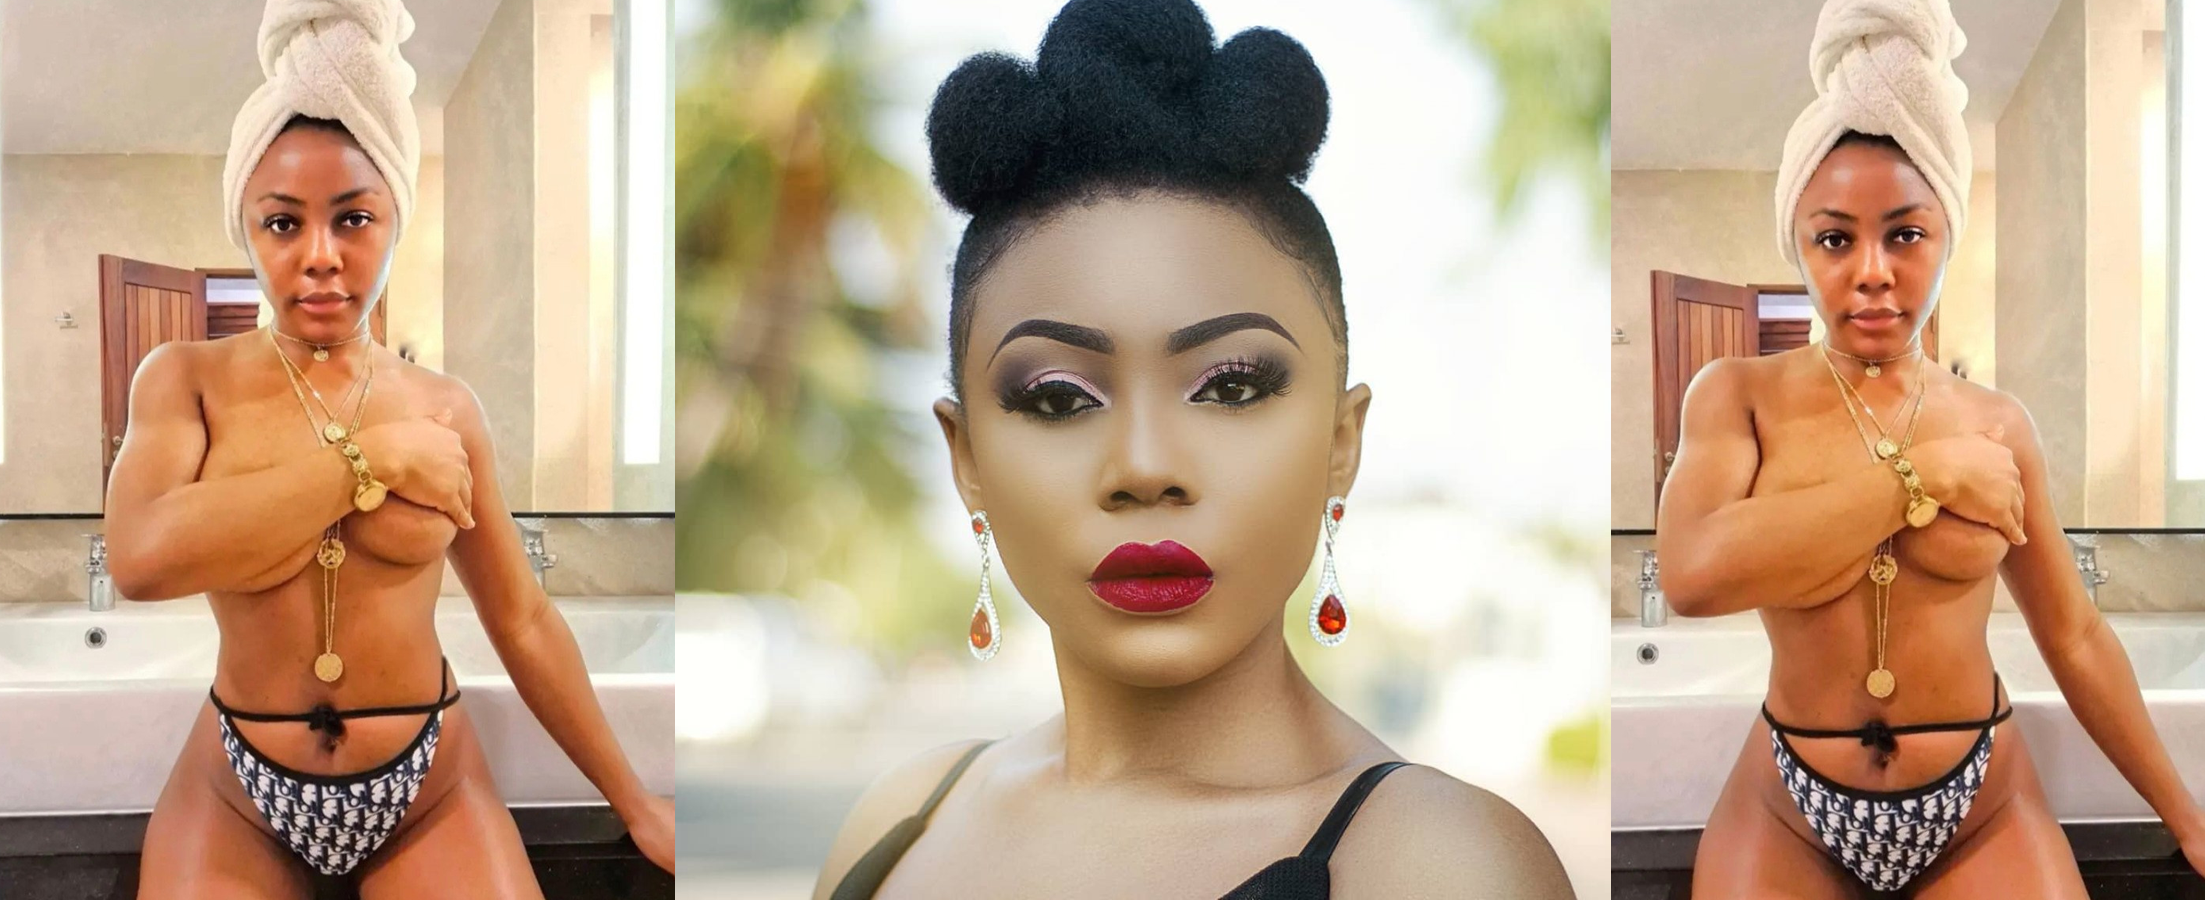 VIDEO: “I Don’t Believe In Cohabiting Before Marriage” – BBN Star, Ifu Ennada Spills